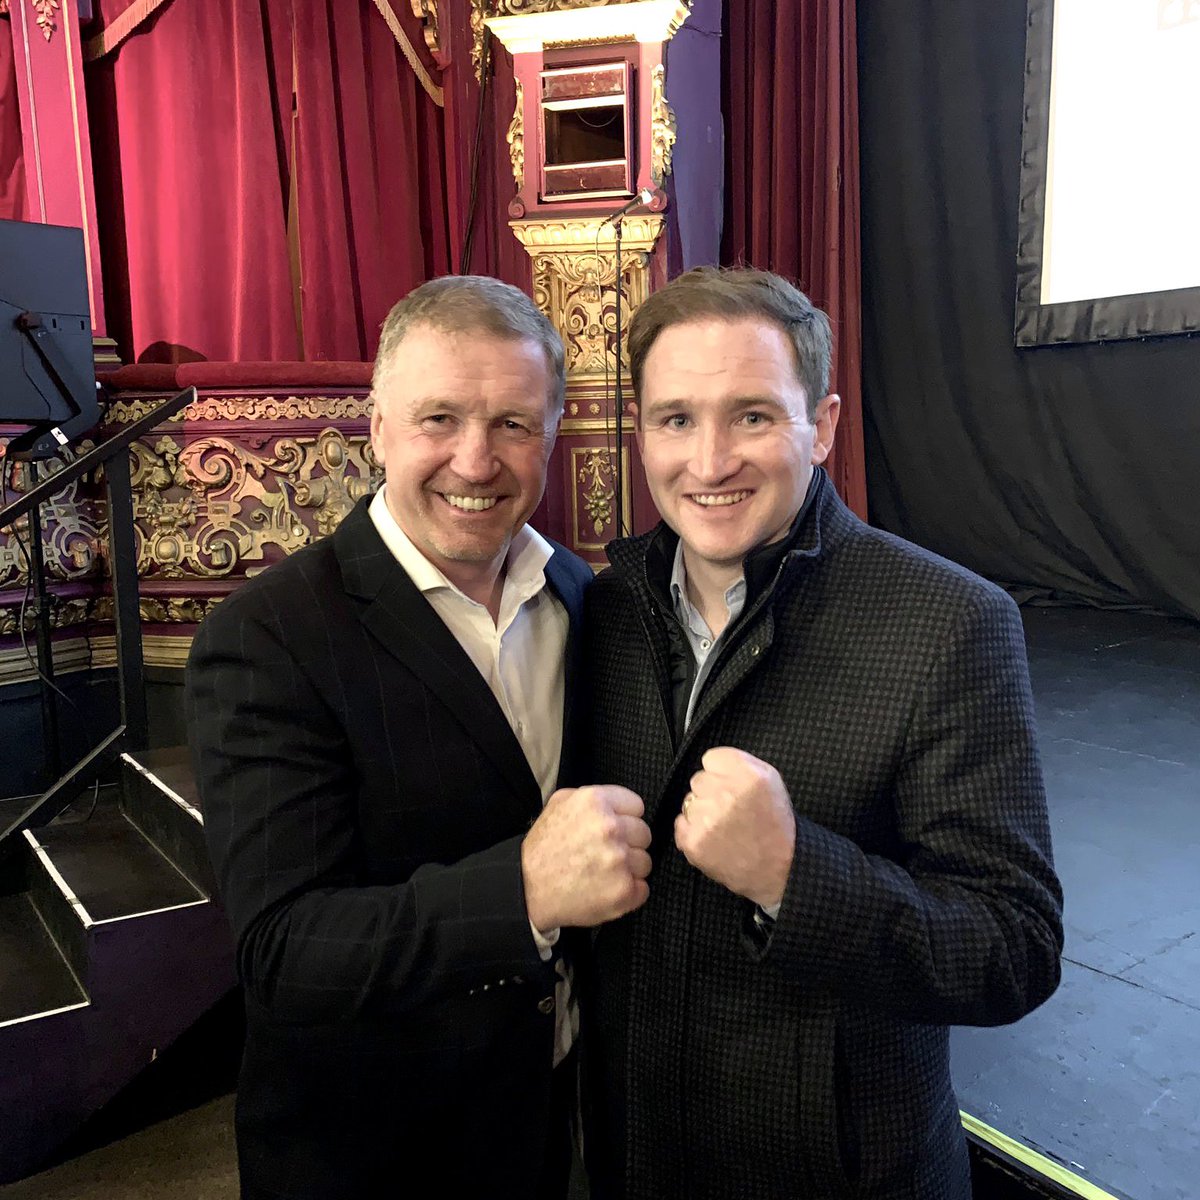 What a pleasure to meet one of my sporting heroes Steve Collins at the premiere of One Night In Millstreet at @Everymancinema last night. It is a brilliant documentary about the iconic night Collins beat Chris Eubank for the world title in an equestrian centre in rural Cork. 🙌